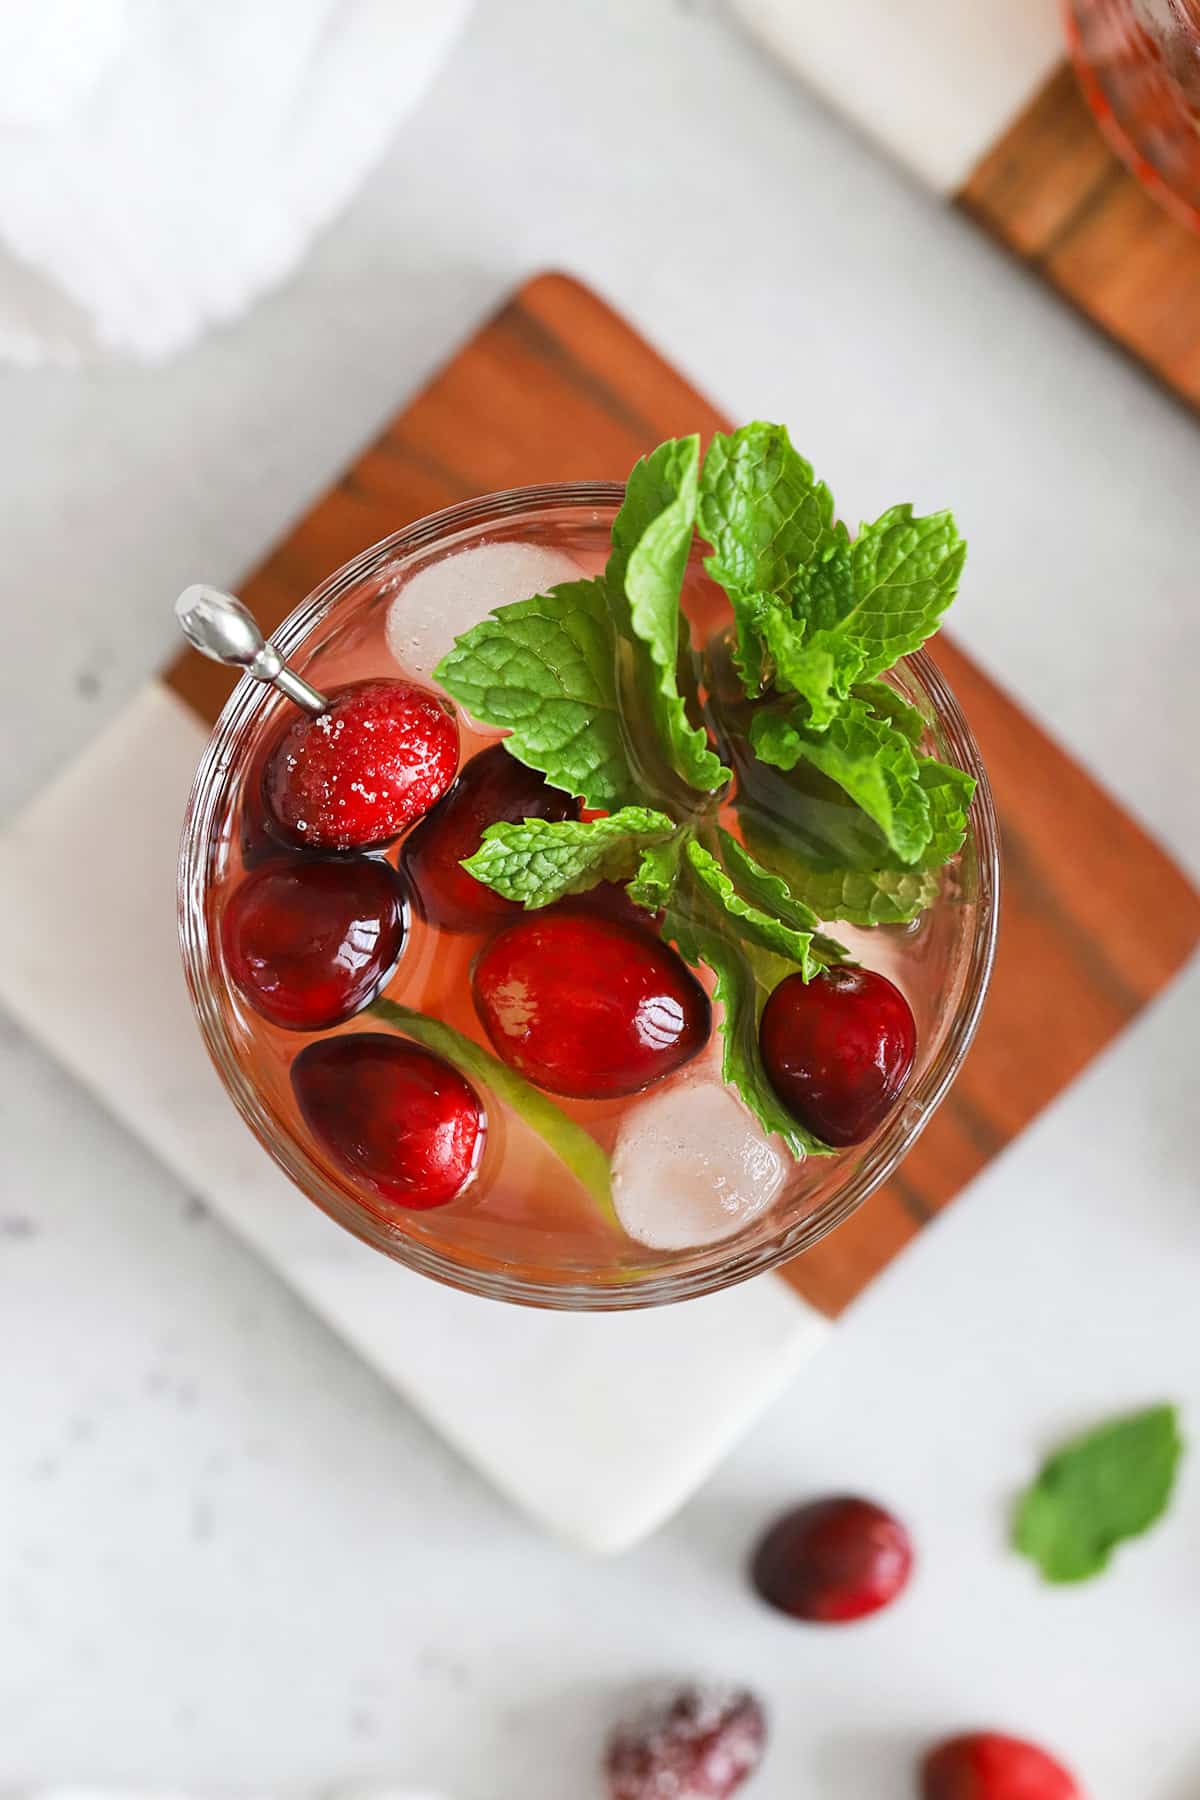 Overhead view of a cranberry mocktail in an embossed glass topped with sugared cranberries, lime slices, and a sprig of fresh mint